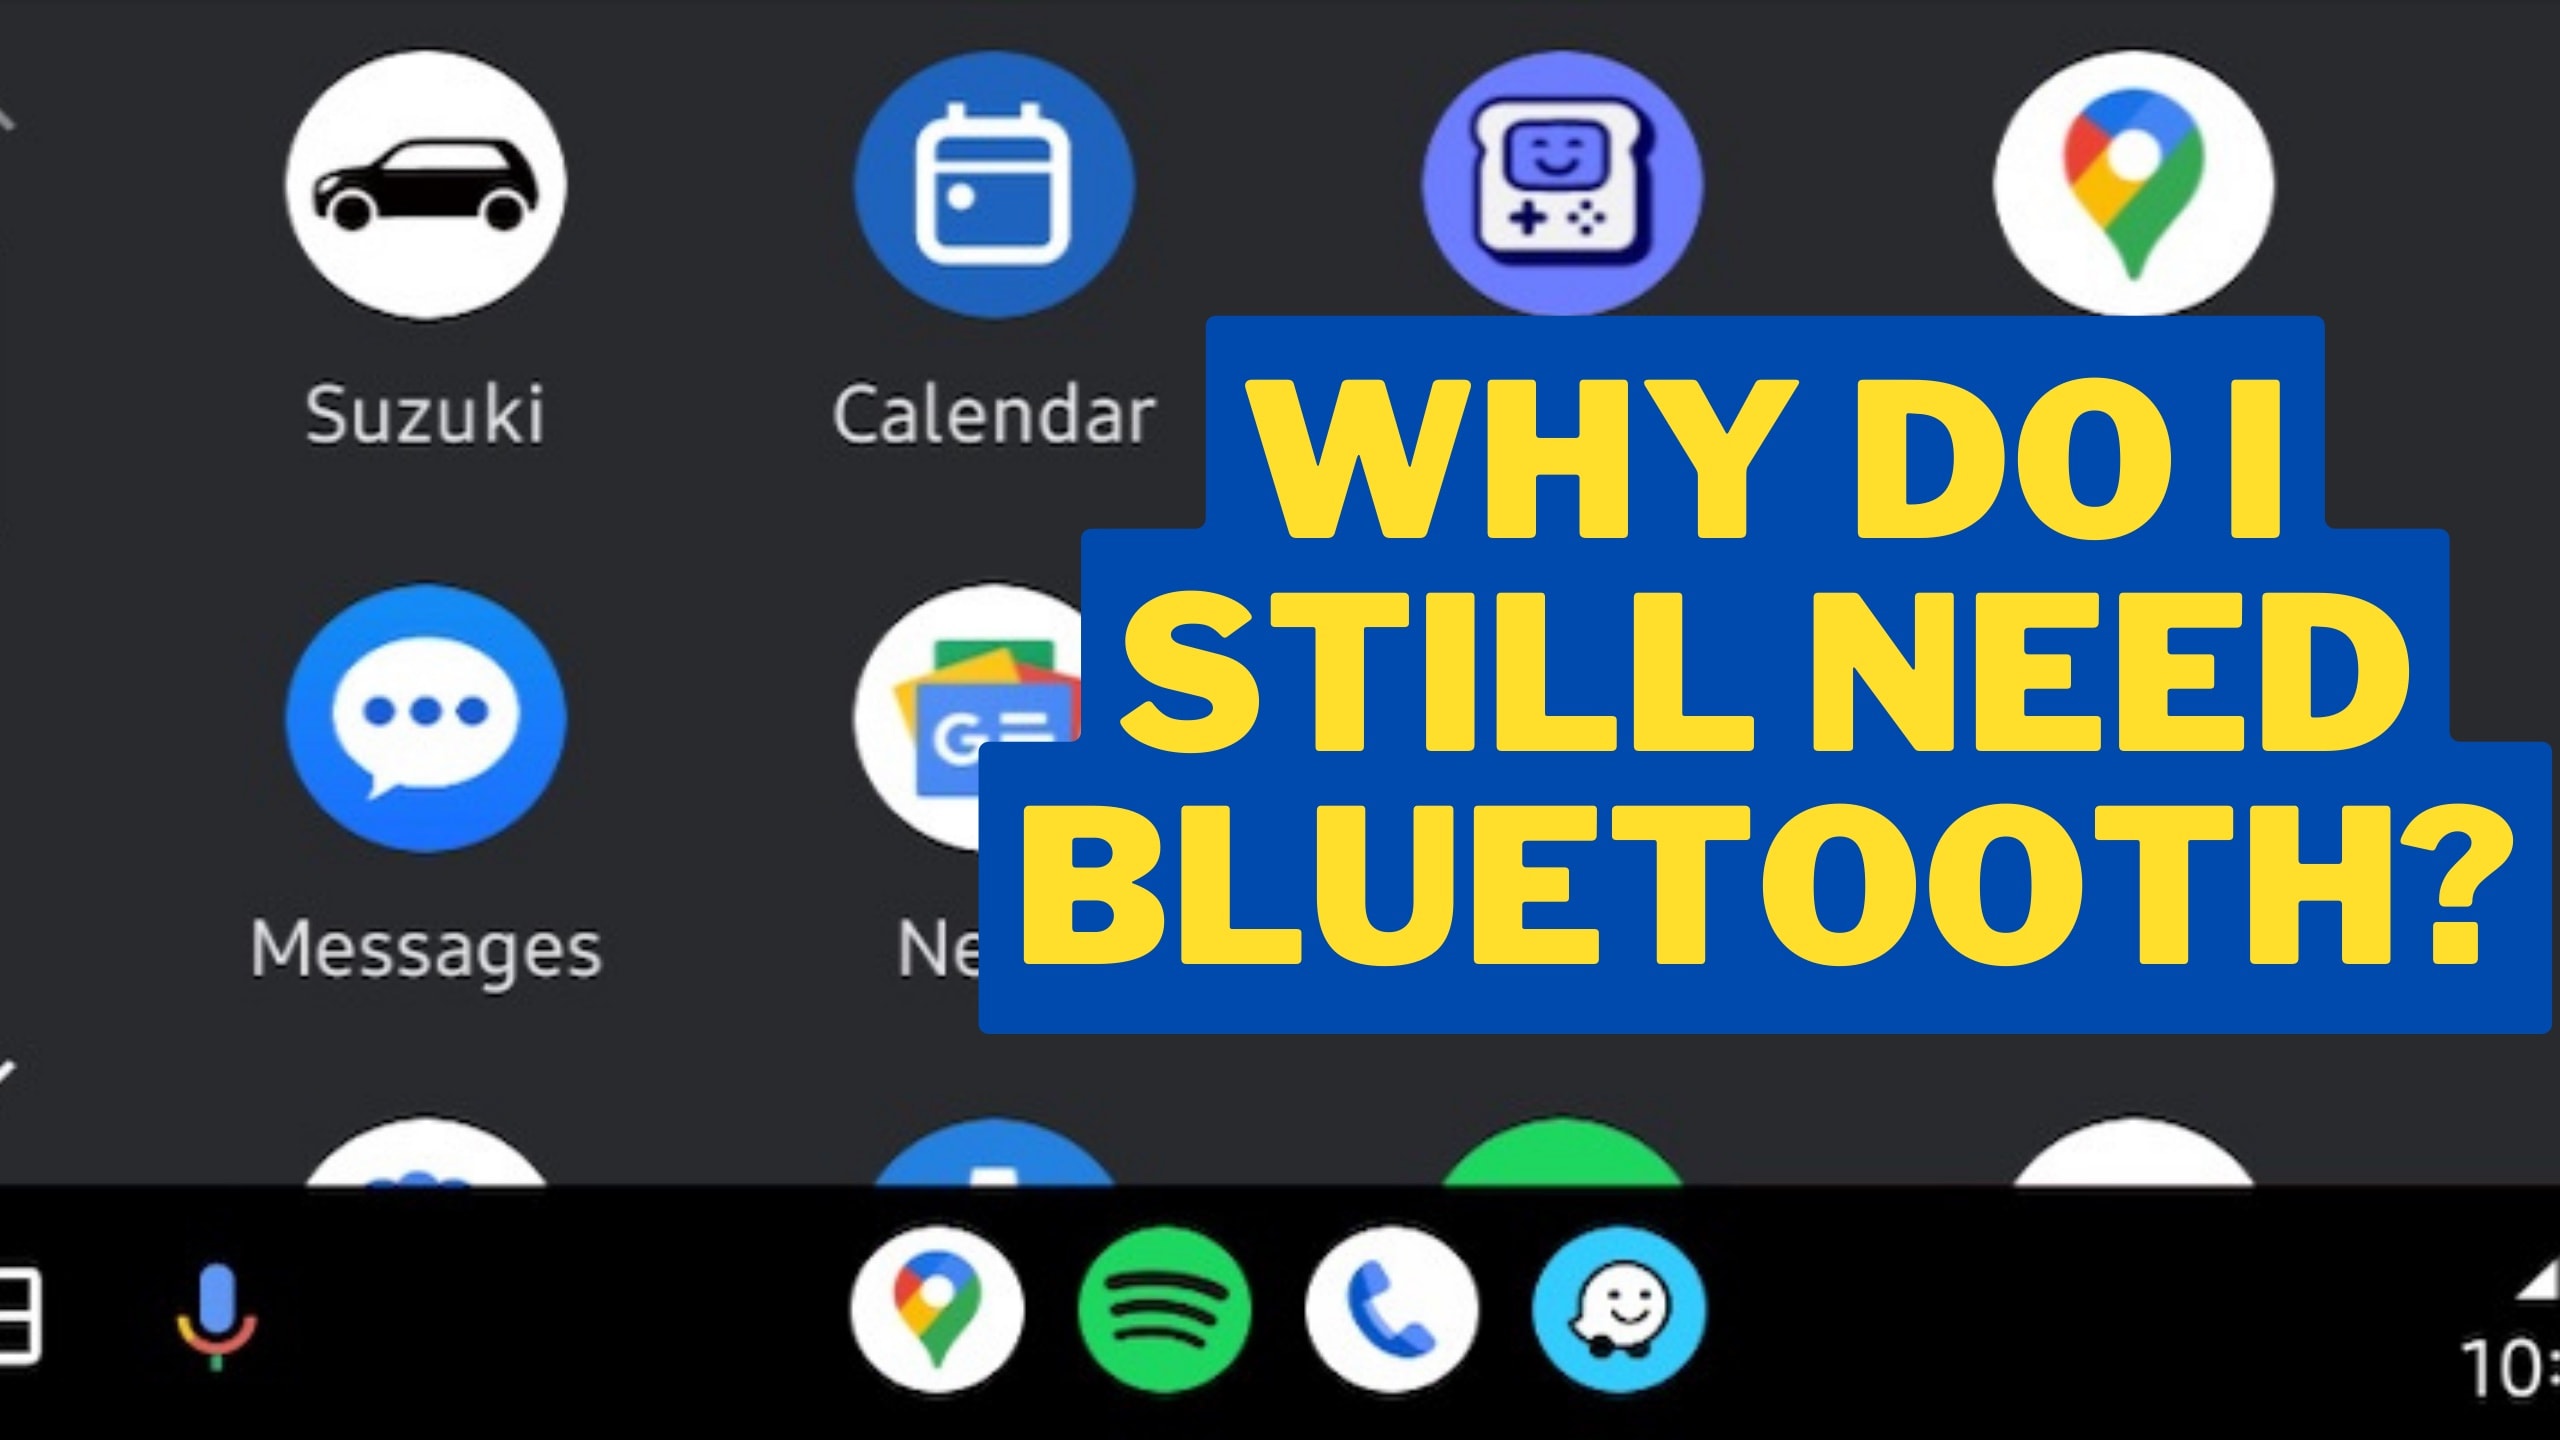 https://s1.cdn.autoevolution.com/images/news/why-android-auto-uses-bluetooth-despite-the-wired-connection-216236_1.jpg